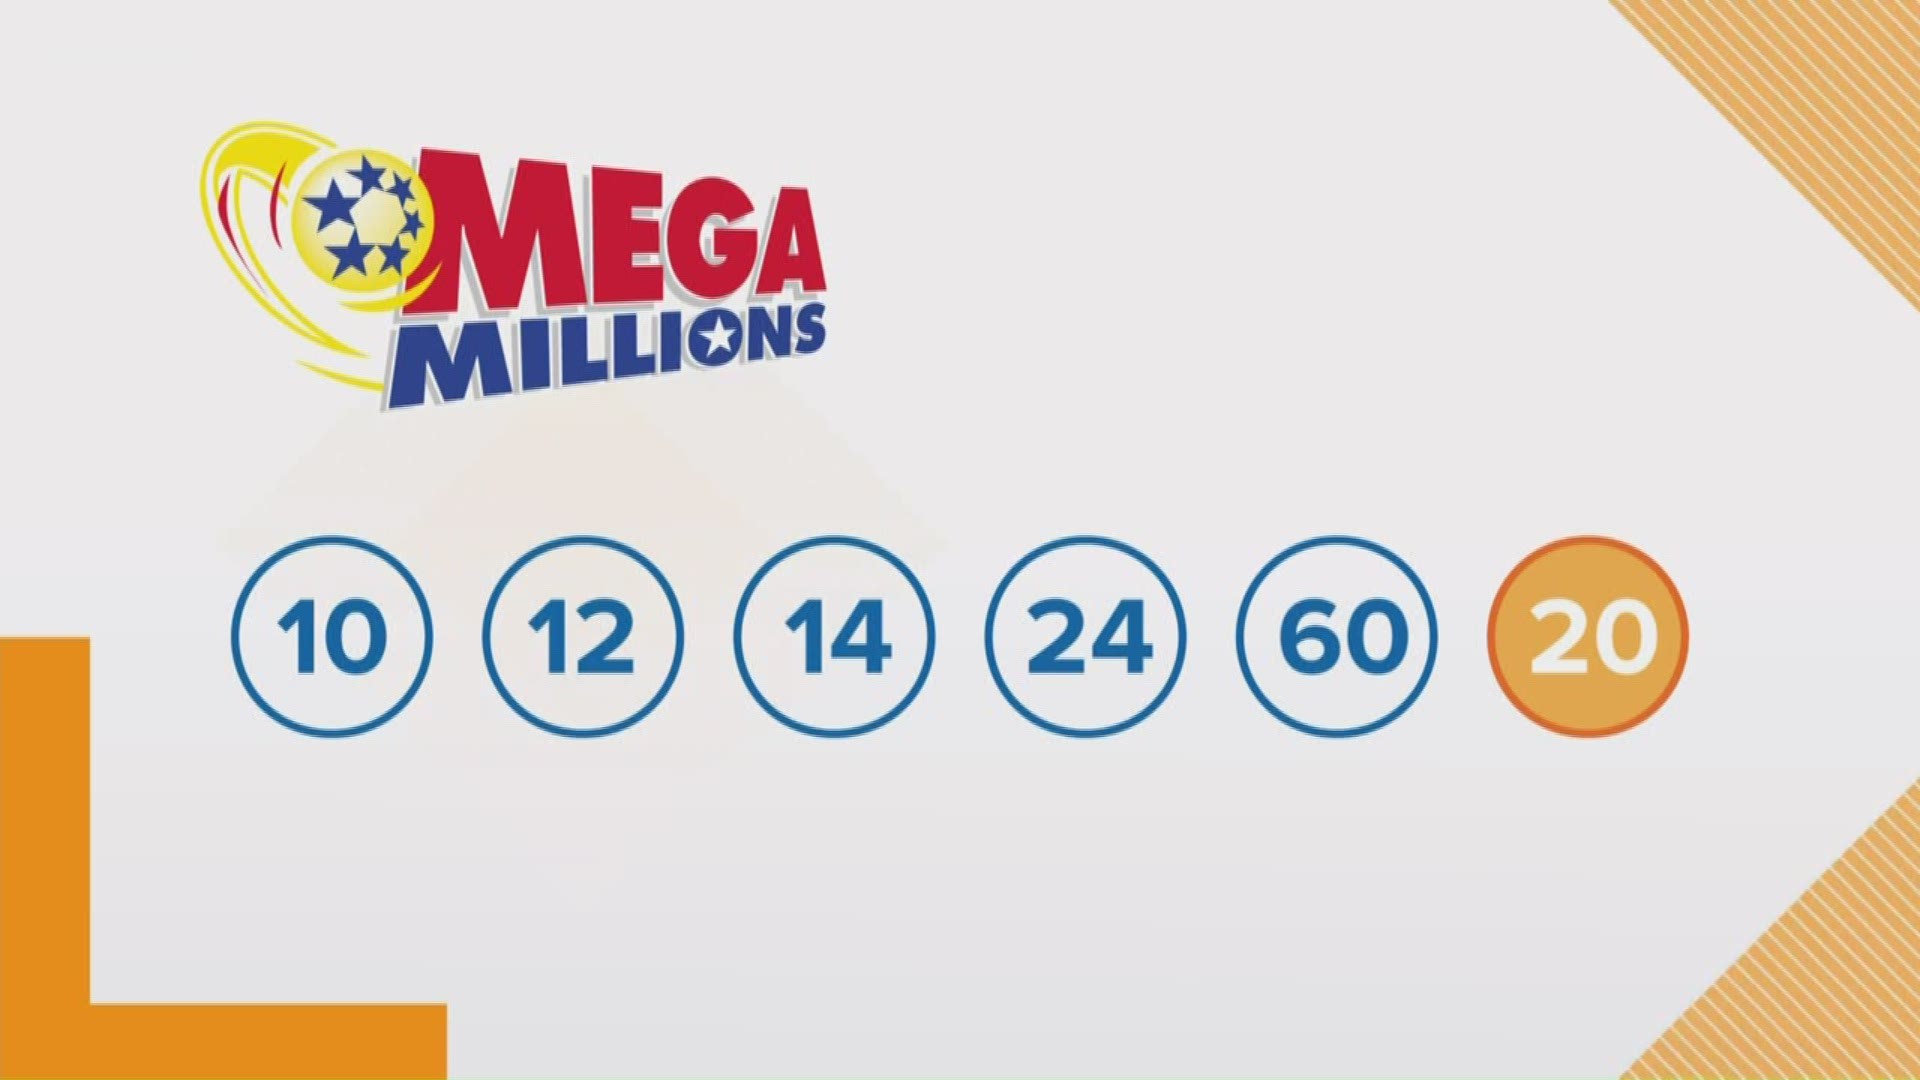 The Louisiana Lottery Corporation reports that a Mega Millions ticket sold at the Carwash Depot on W. Pine Street is now worth $10,000.